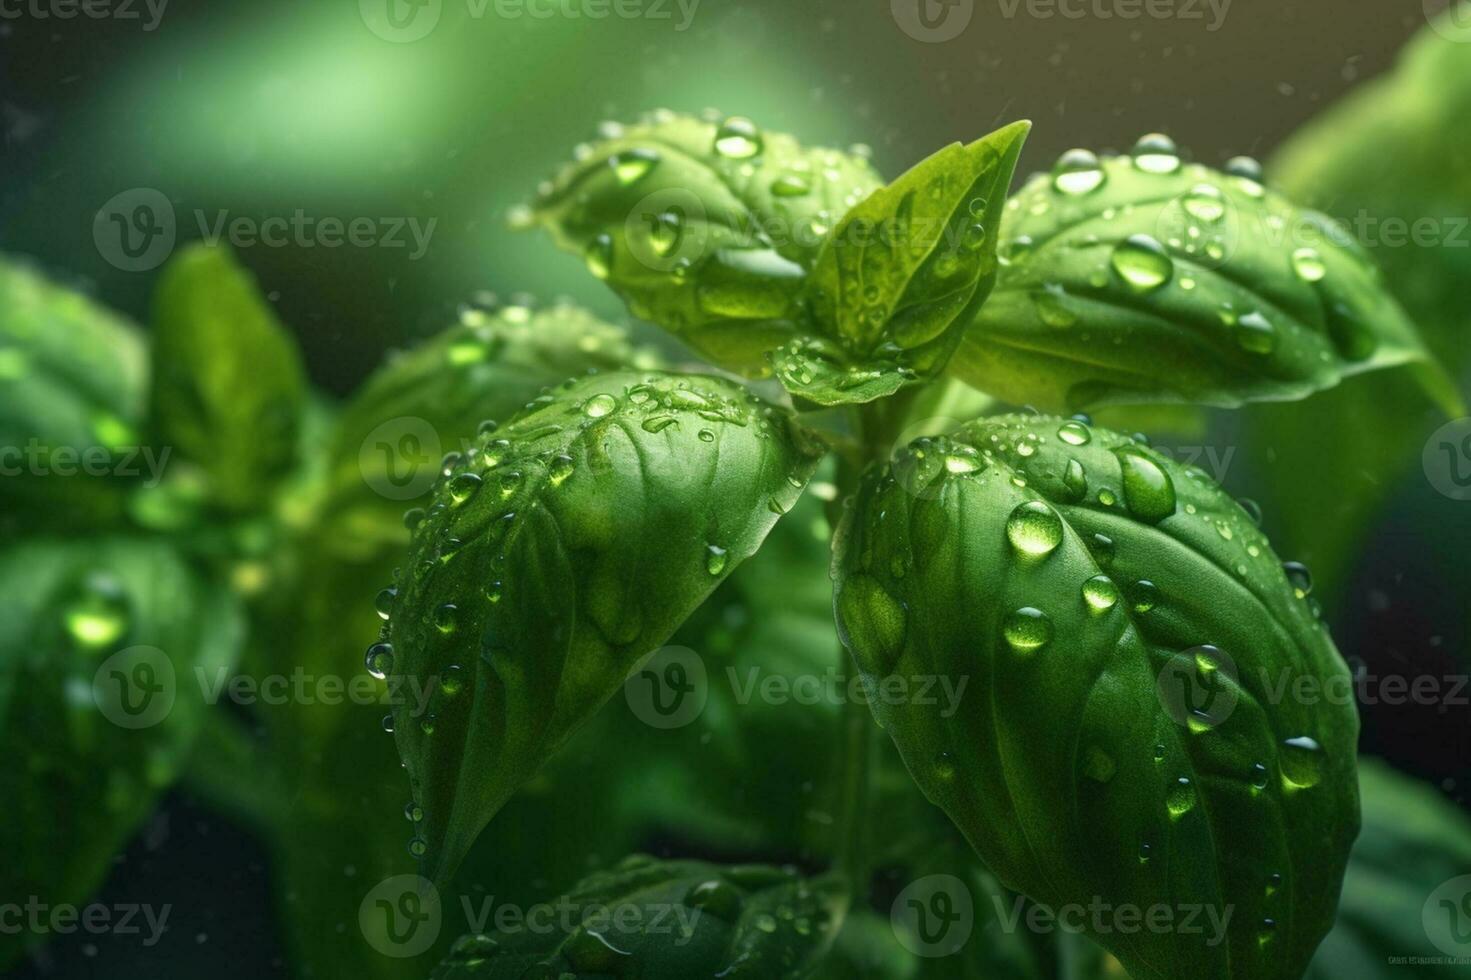 Fresh sweet basil leaves with drops of water. Basil plant with green leaves on dark background. Fresh herbs for cooking, used in cuisines worldwide. Ocimum basilicum. Health eating photo